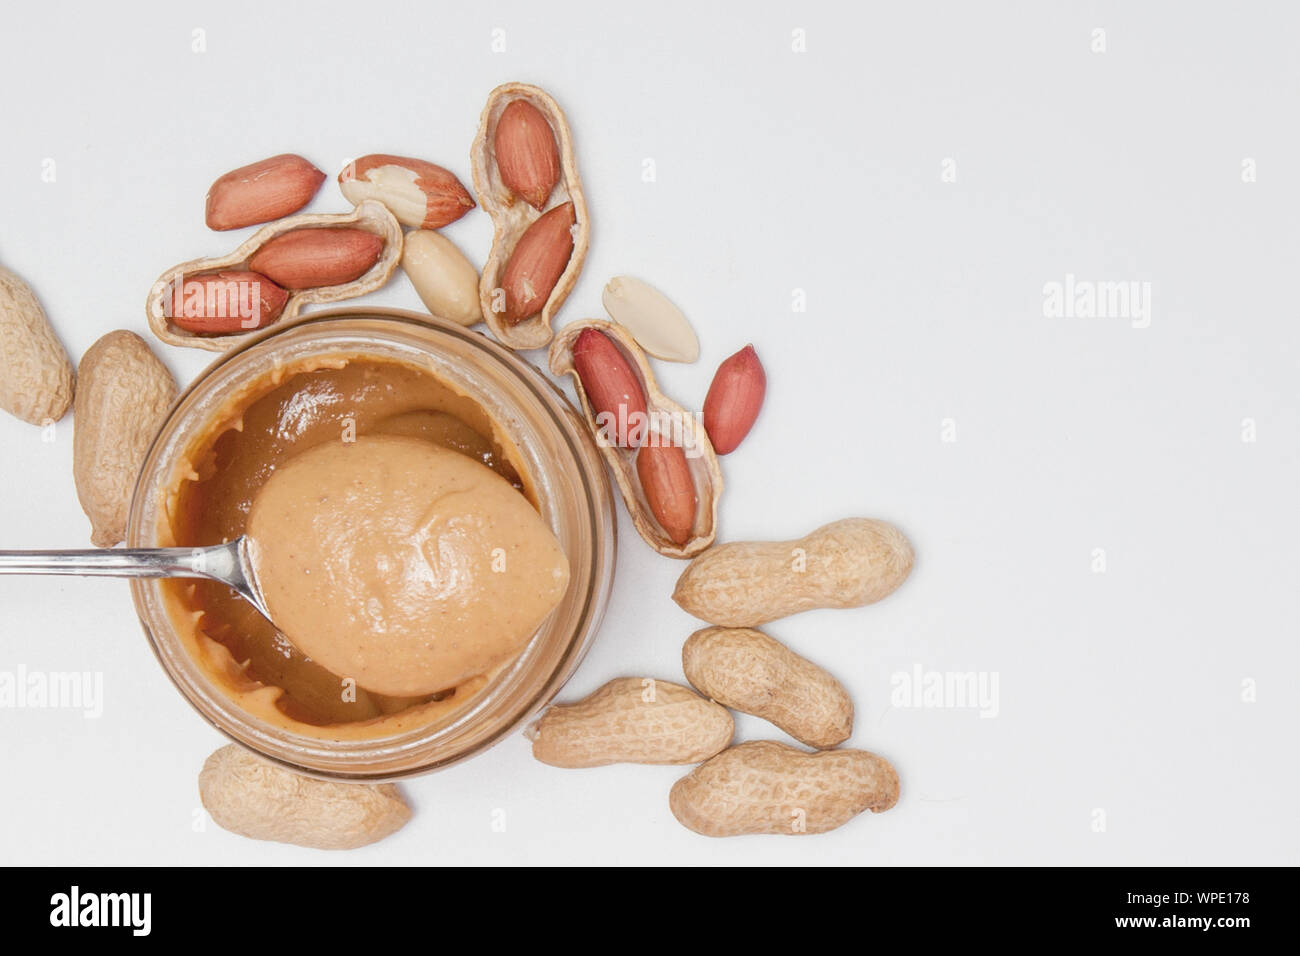 https://c8.alamy.com/comp/WPE178/creamy-peanut-butter-in-glass-jar-peanut-and-spoon-isolated-on-white-background-a-traditional-product-of-american-cuisine-WPE178.jpg